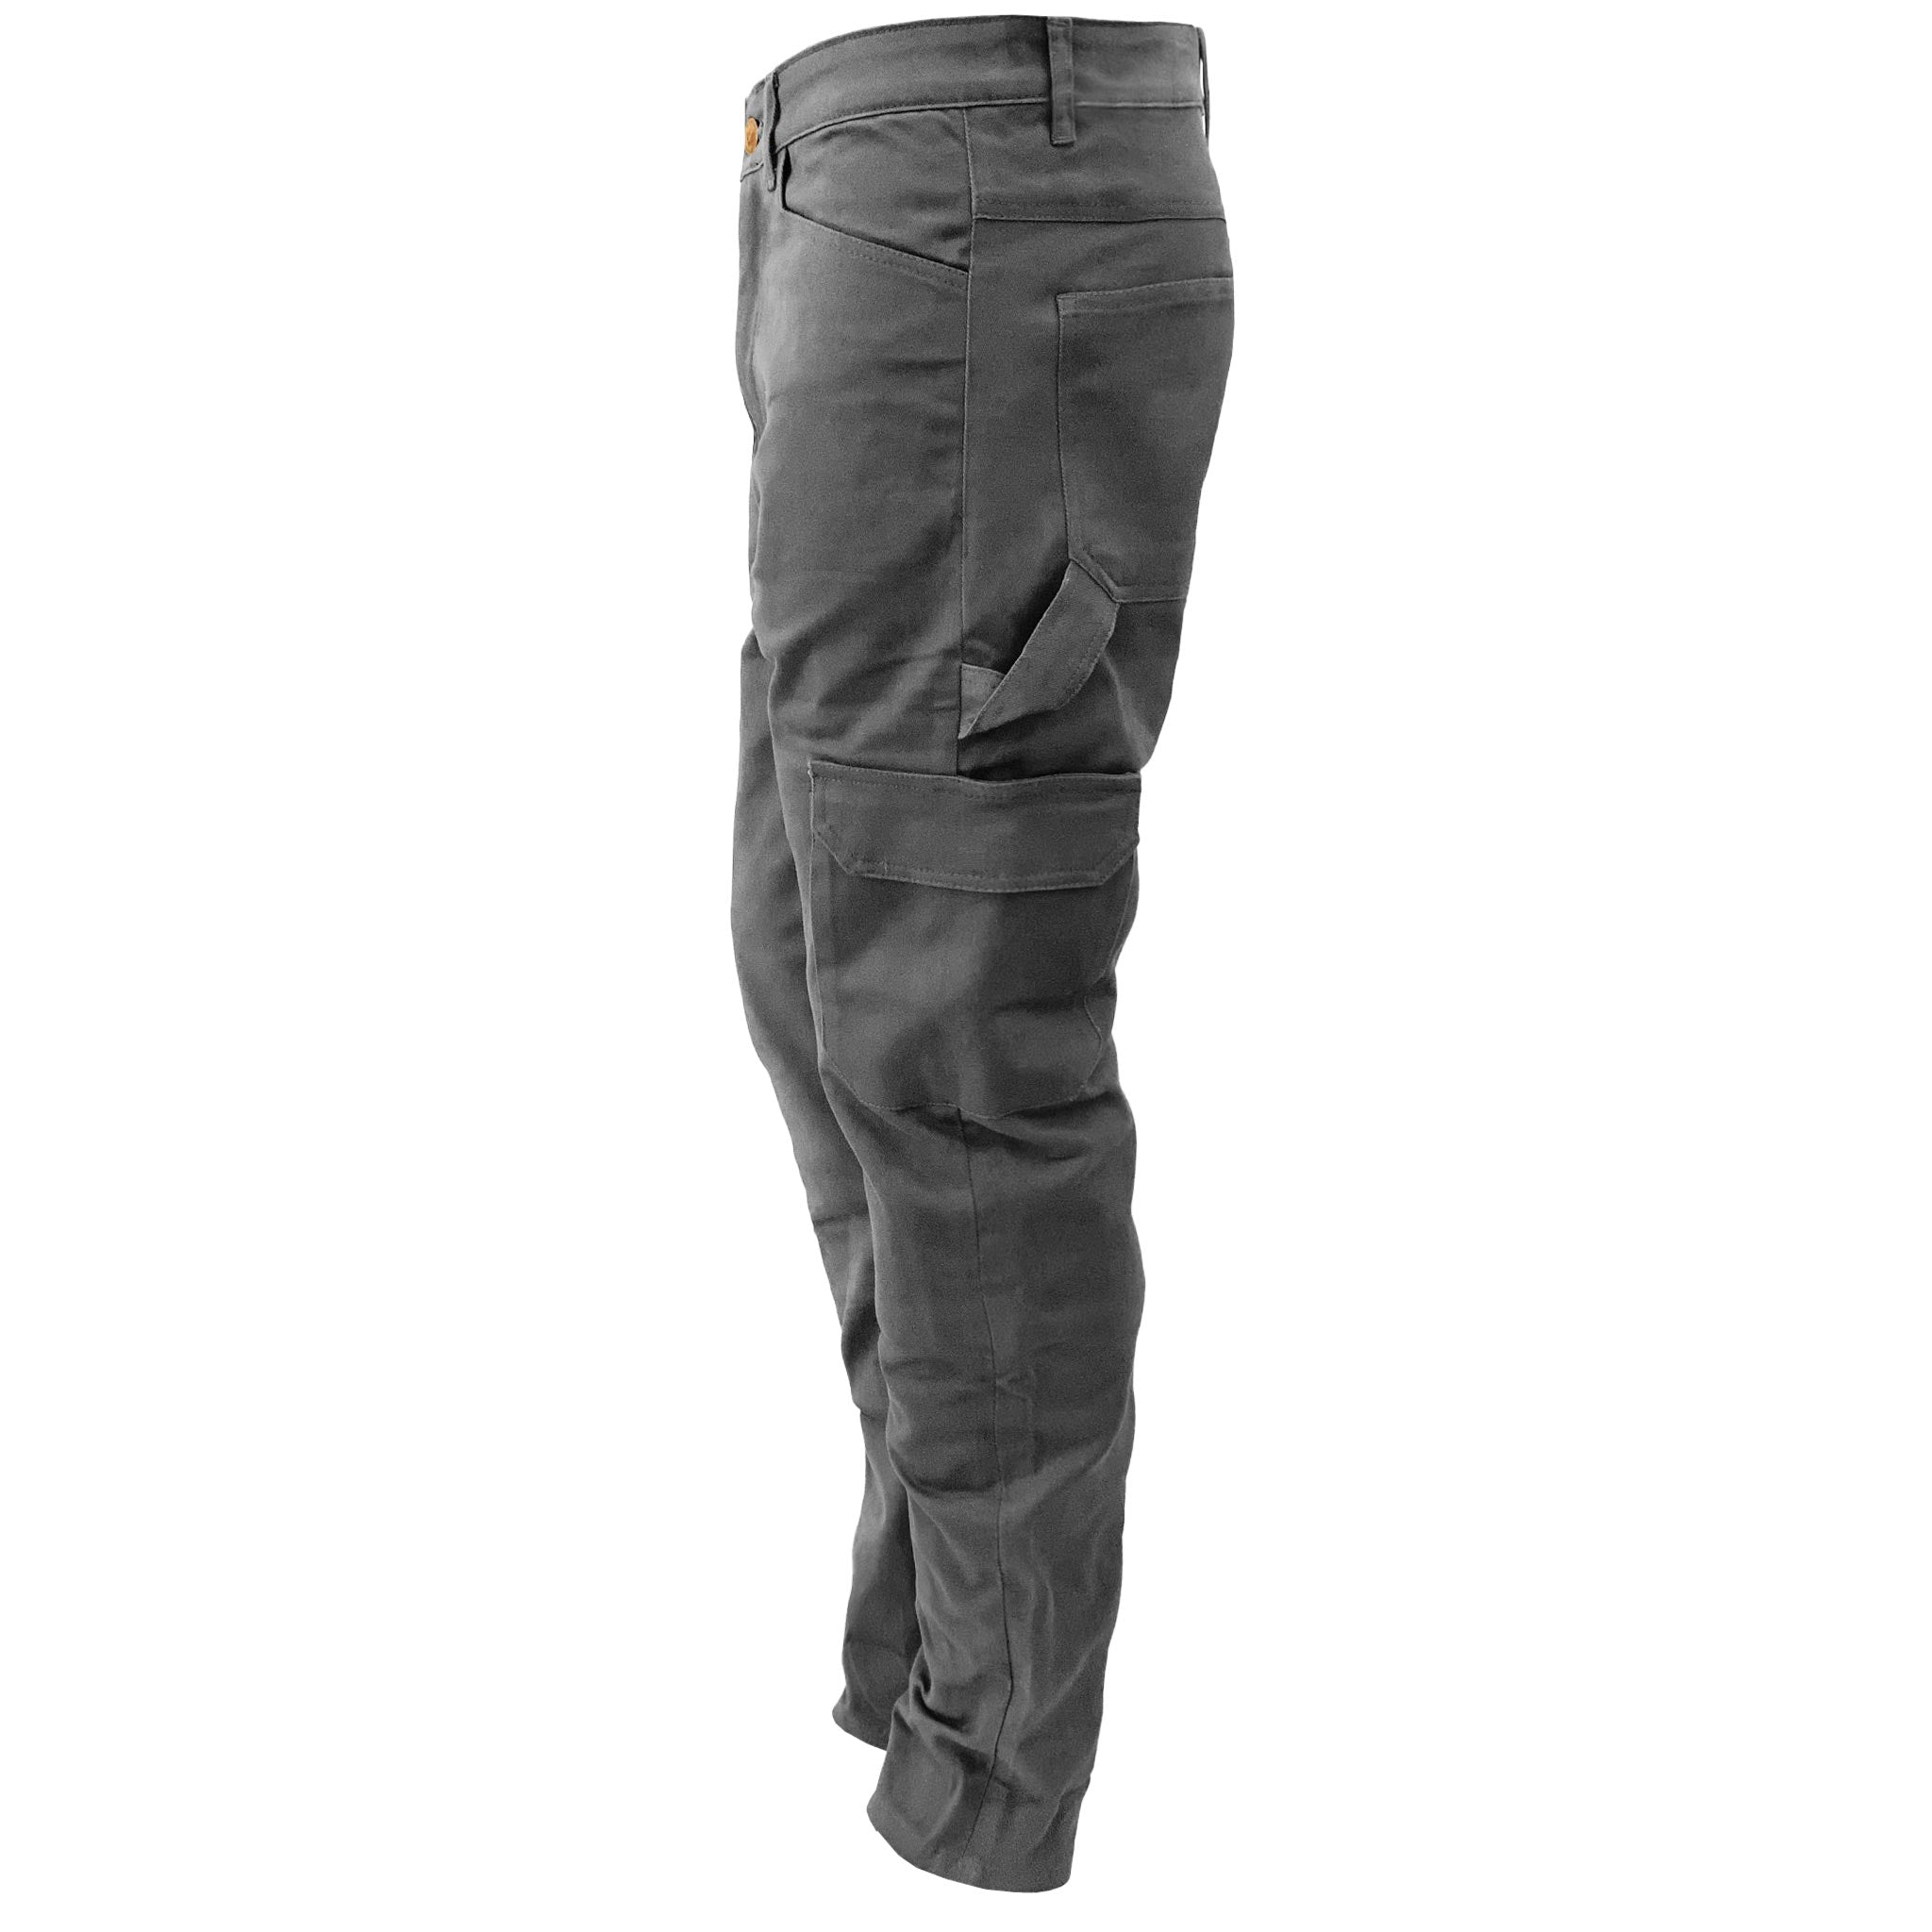 SALE Straight Leg Cargo Pants - Gray with Pads